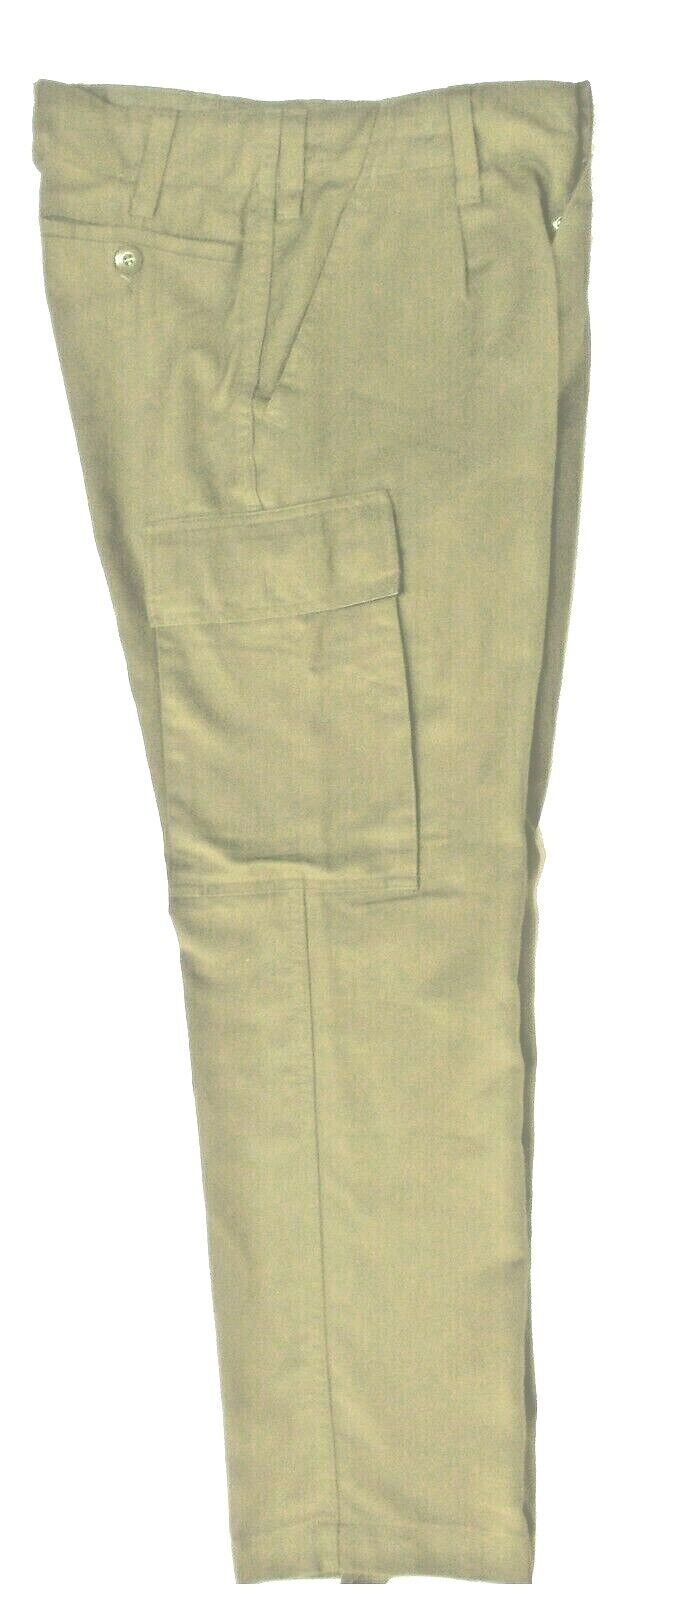 Combat Trouser Fine Cotton BW German Army EU Made Washed Fabric Beige XL 38\